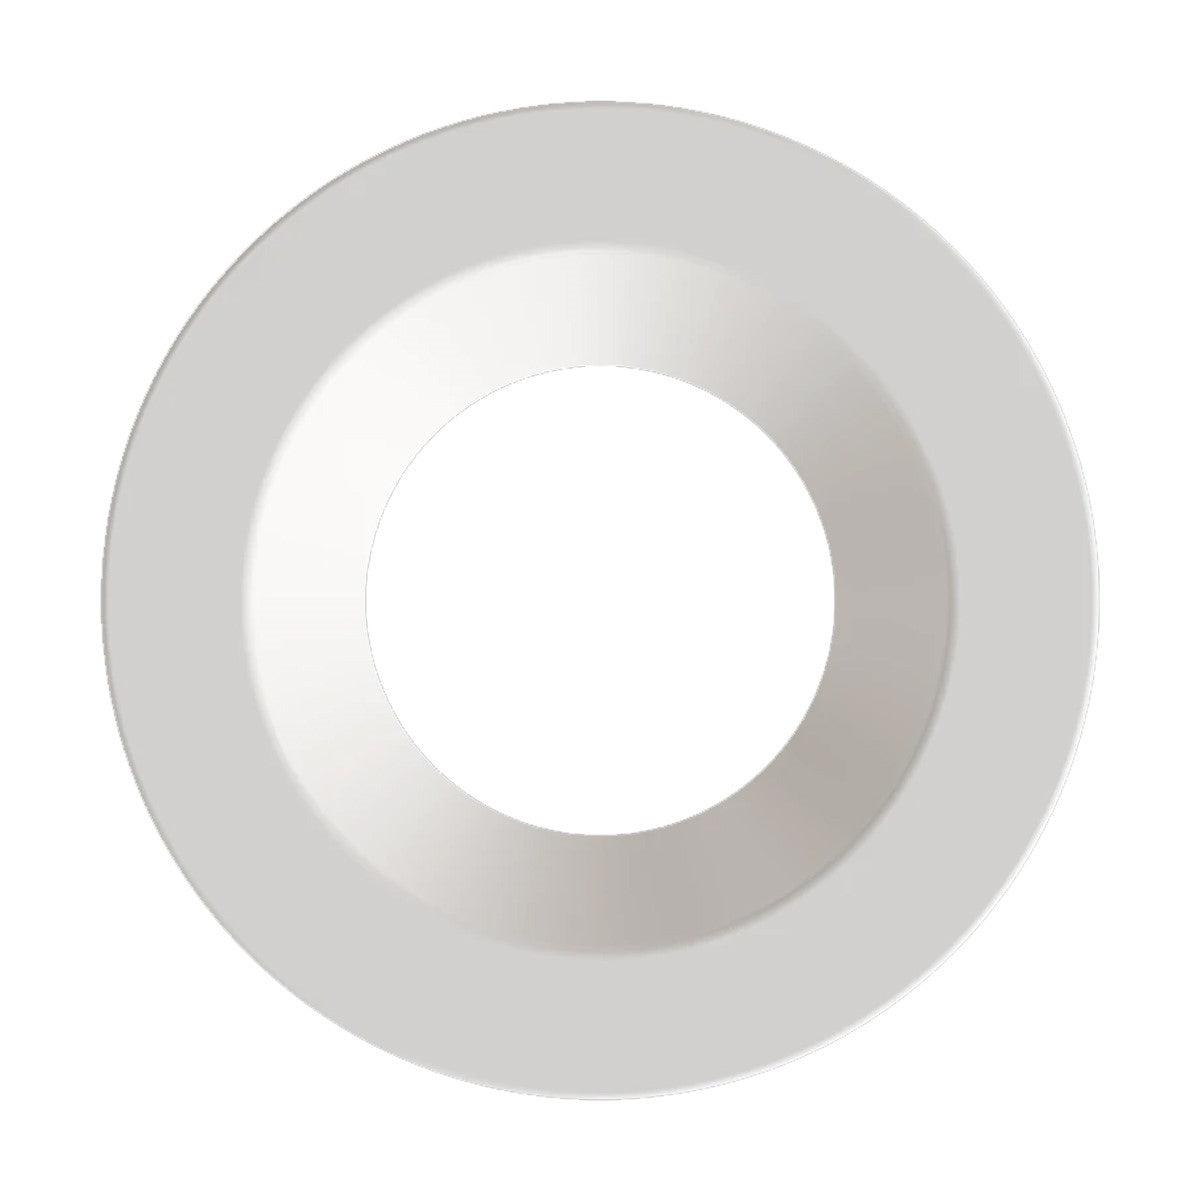 RAB 4 Inch Round White / Smooth Trim for HA4 Series